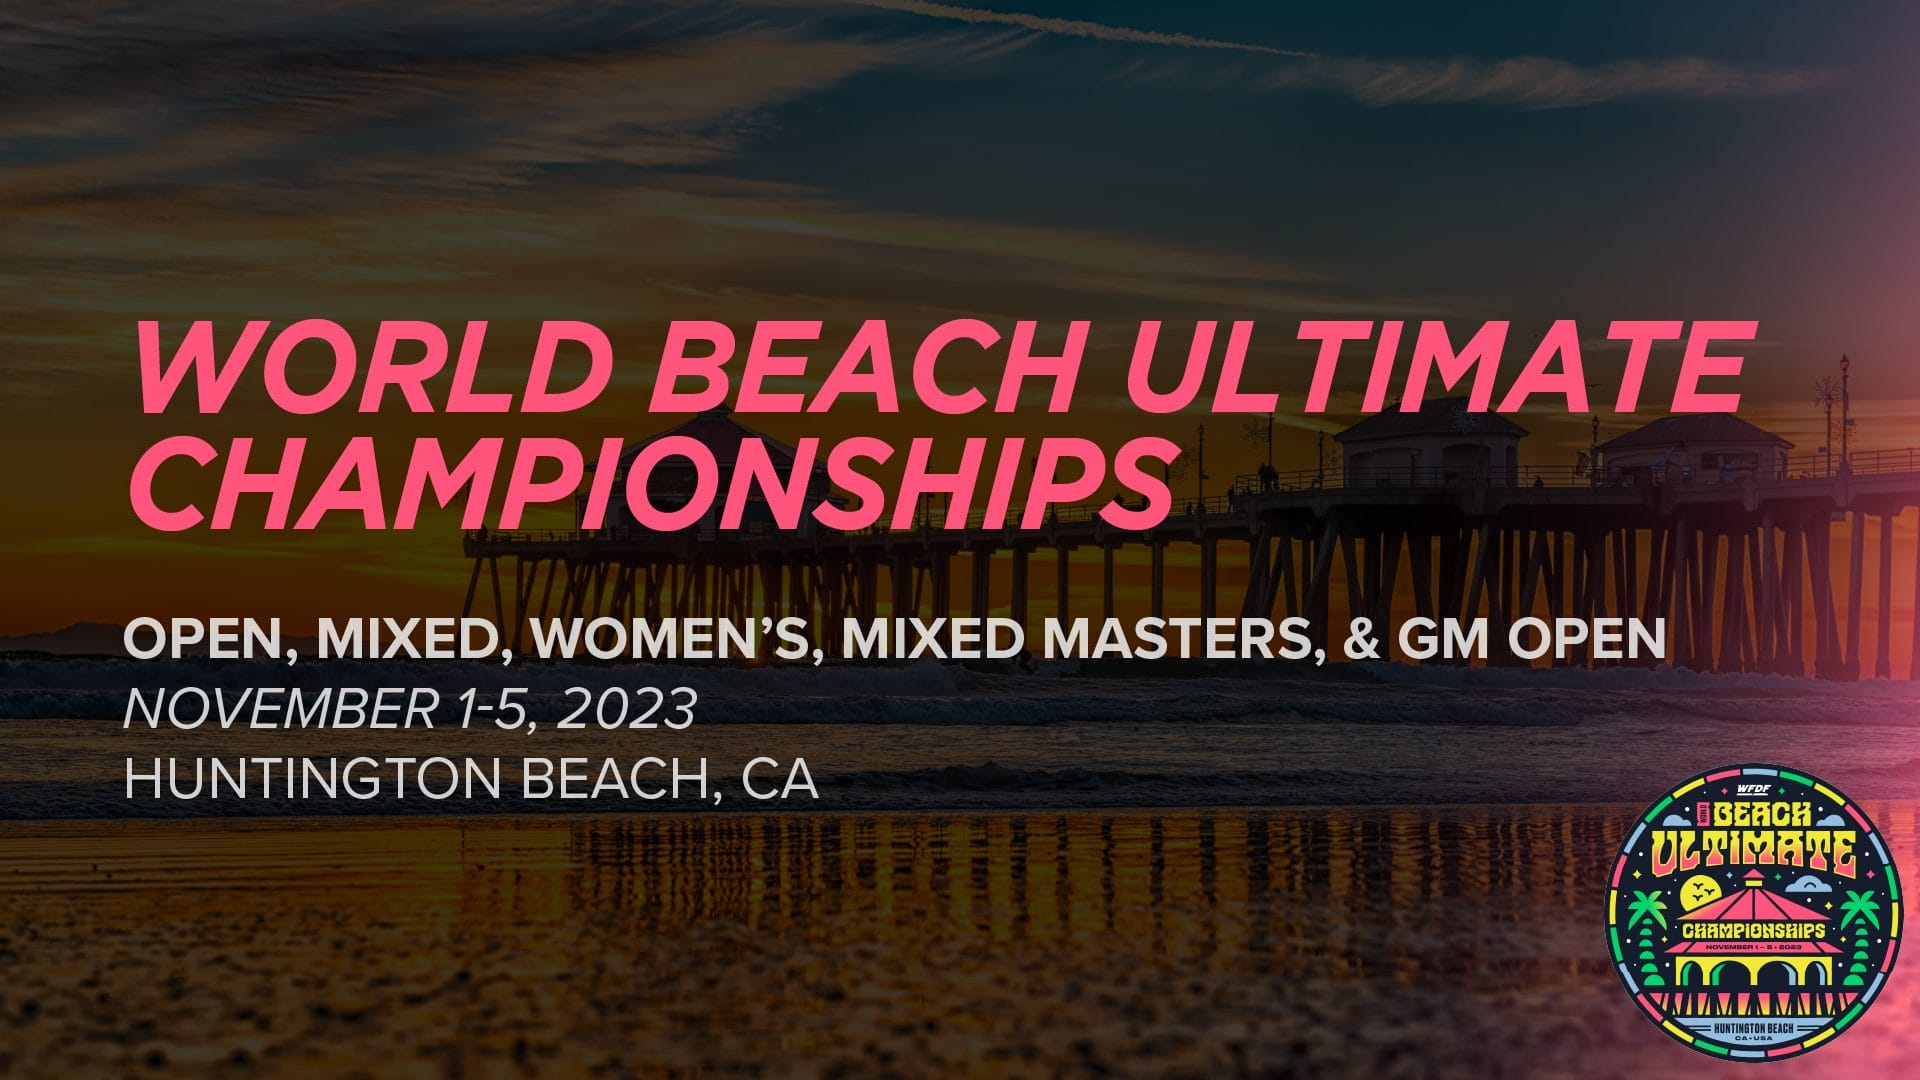 2023 World Beach Ultimate Championships Event News, Stats, Schedule